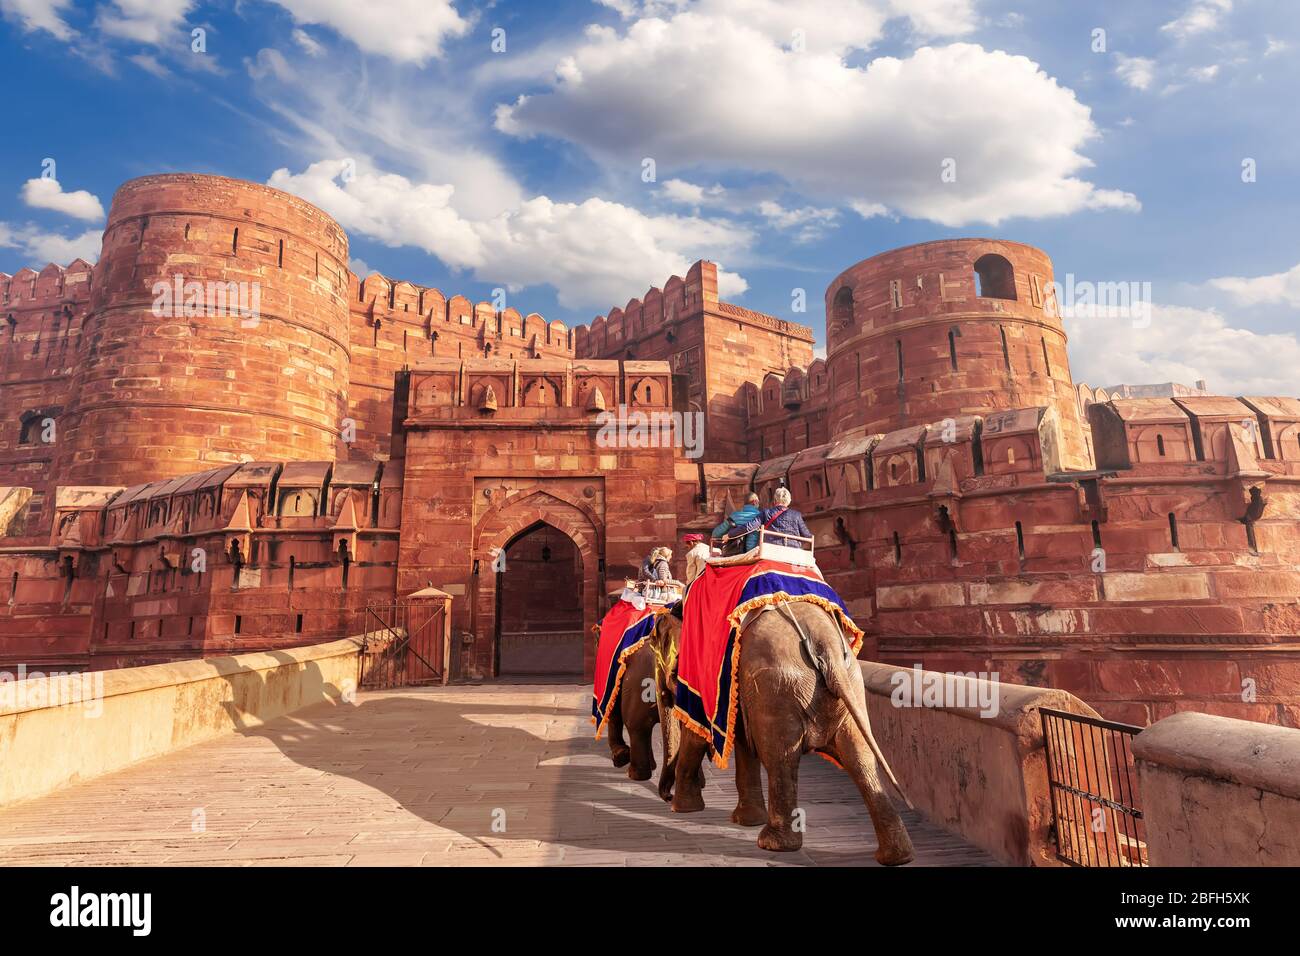 Agra Fort and elephants, view of India Stock Photo